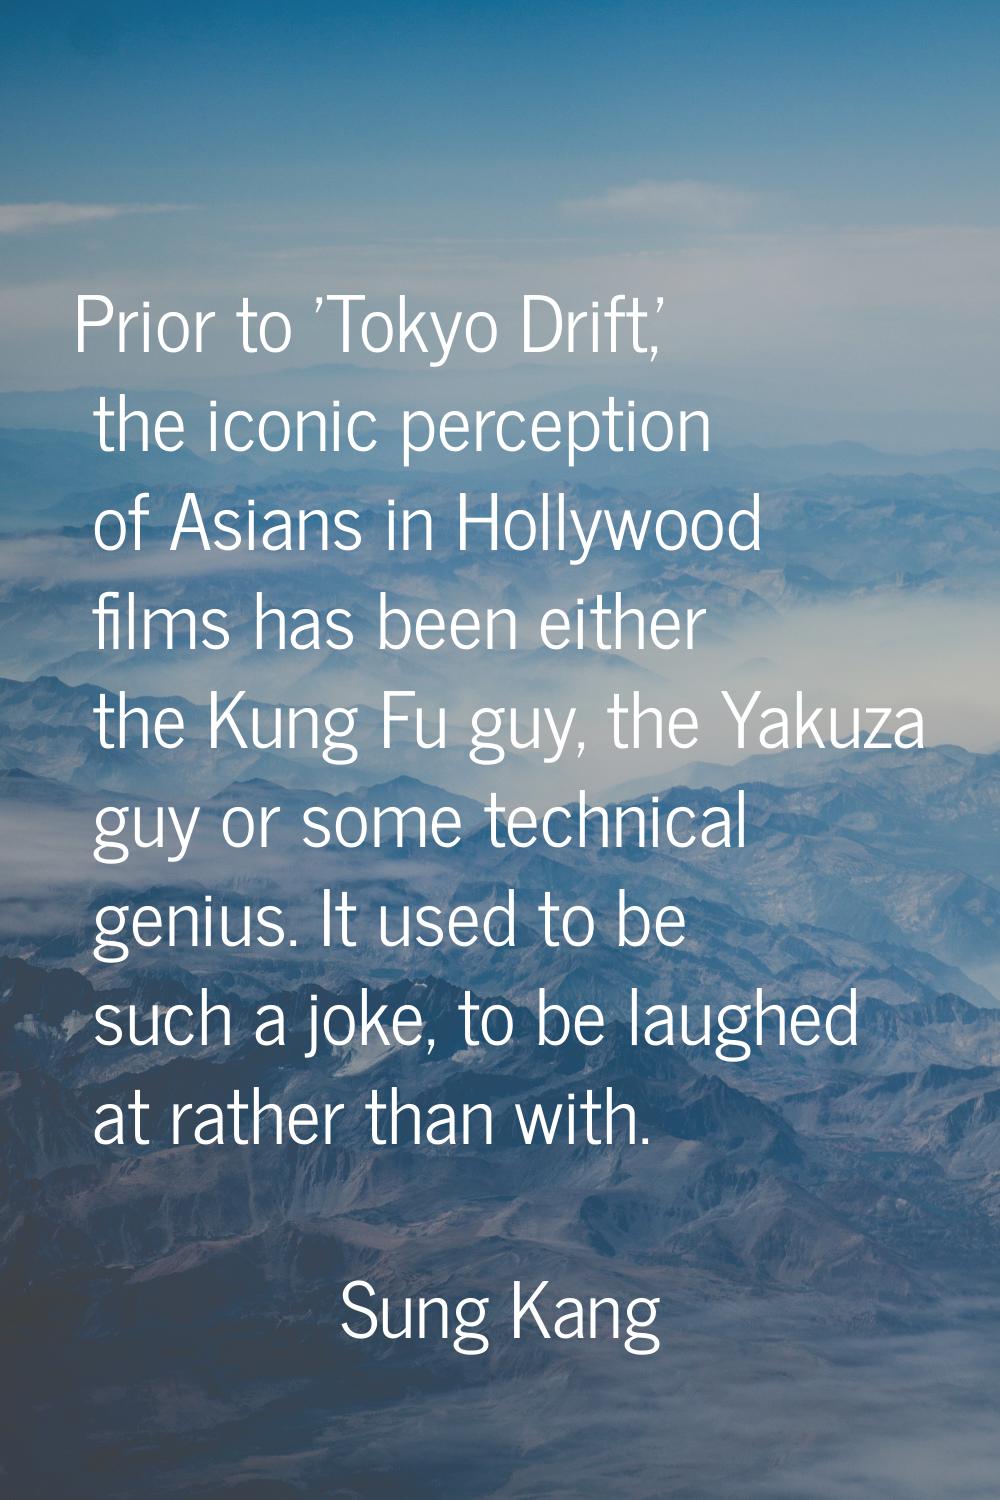 Prior to 'Tokyo Drift,' the iconic perception of Asians in Hollywood films has been either the Kung